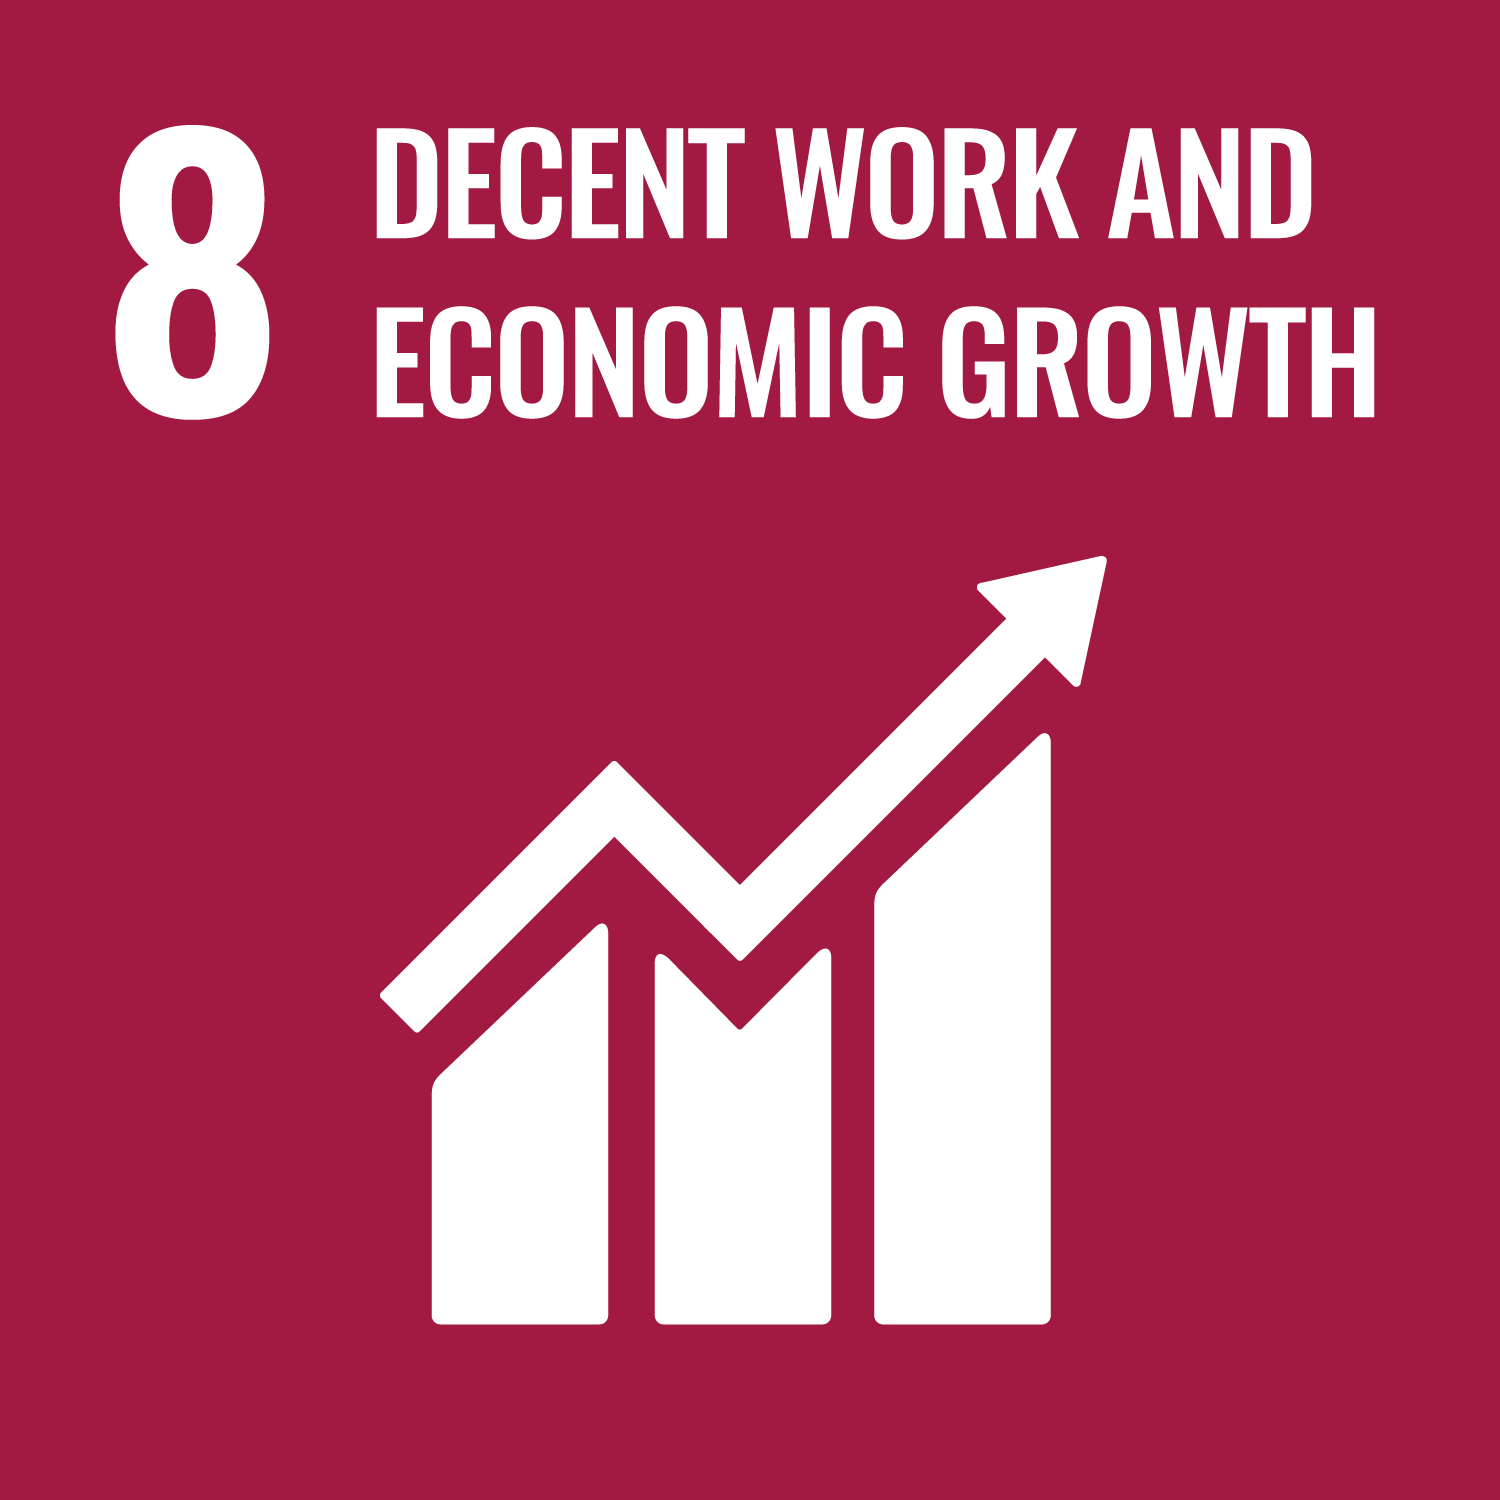 Target 8．Decent work and economic growth